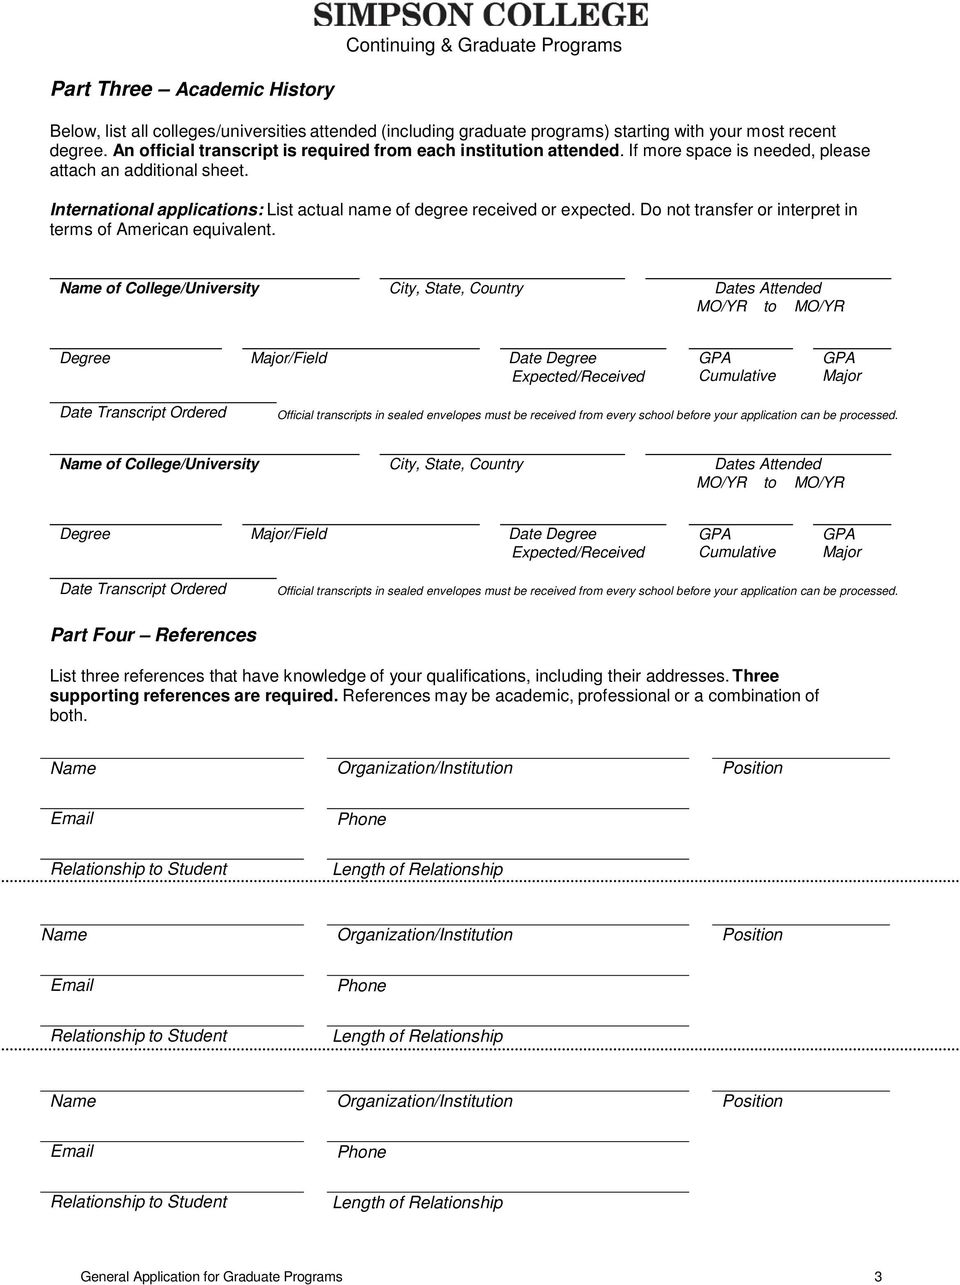 International applications: List actual name of degree received or expected. Do not transfer or interpret in terms of American equivalent.